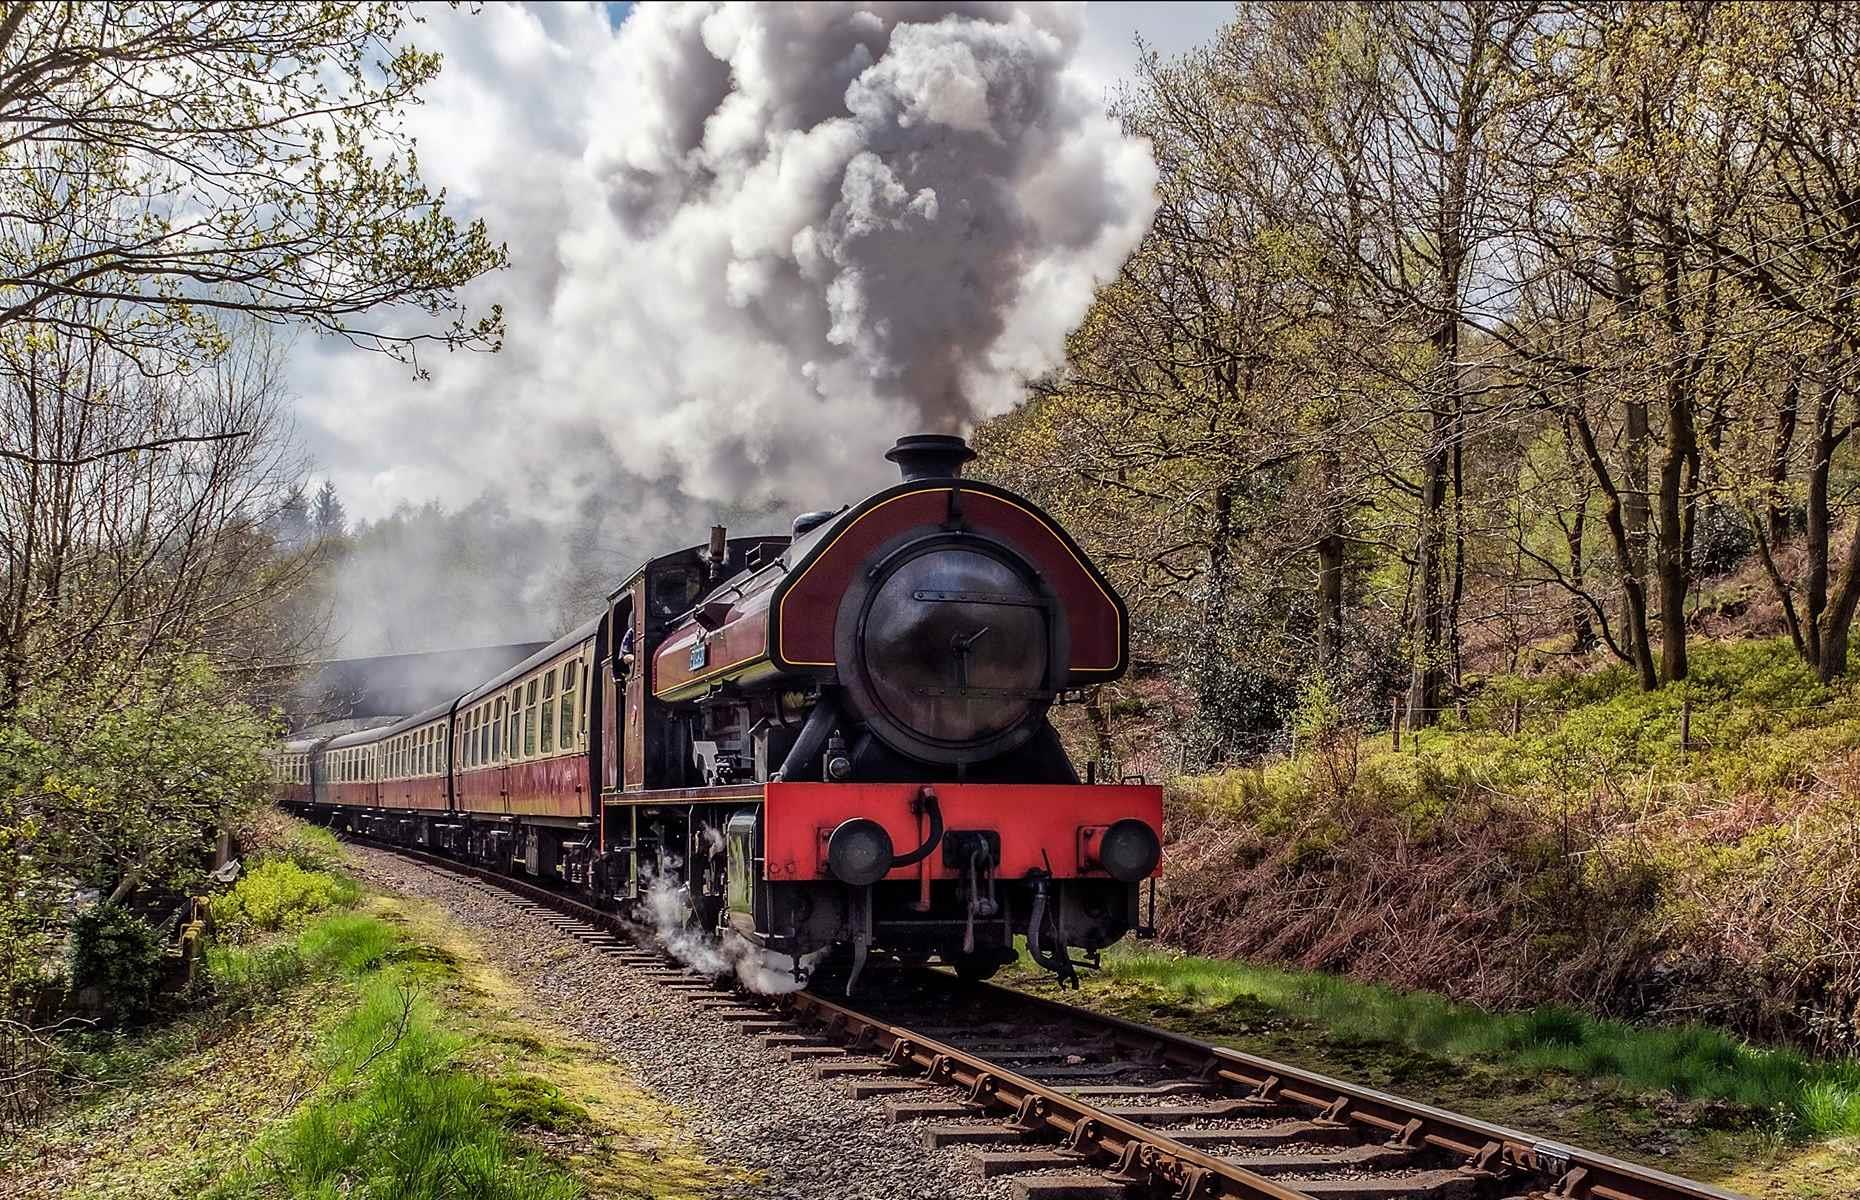 <p>In the heart of the Lake District National Park, this <a href="https://www.lakesiderailway.co.uk/">scenic stretch of tracks</a> in Cumbria is all that remains of the former Furness Railway. Following its closure in the 1960s due to a drop in passengers, three-and-a-half miles (5.6km) of the line was reopened in 1973 as the Lakeside & Haverthwaite Railway. Today, its nostalgic 1950s steam trains take passengers from the village of Haverthwaite past peaceful countryside before ending at the lovely Lakeside Pier at the foot of the famous Lake Windermere, England's largest natural lake.</p>  <p><a href="https://www.loveexploring.com/gallerylist/107456/the-uks-most-stunning-natural-wonders"><strong>Explore the UK’s most stunning natural wonders</strong></a></p>